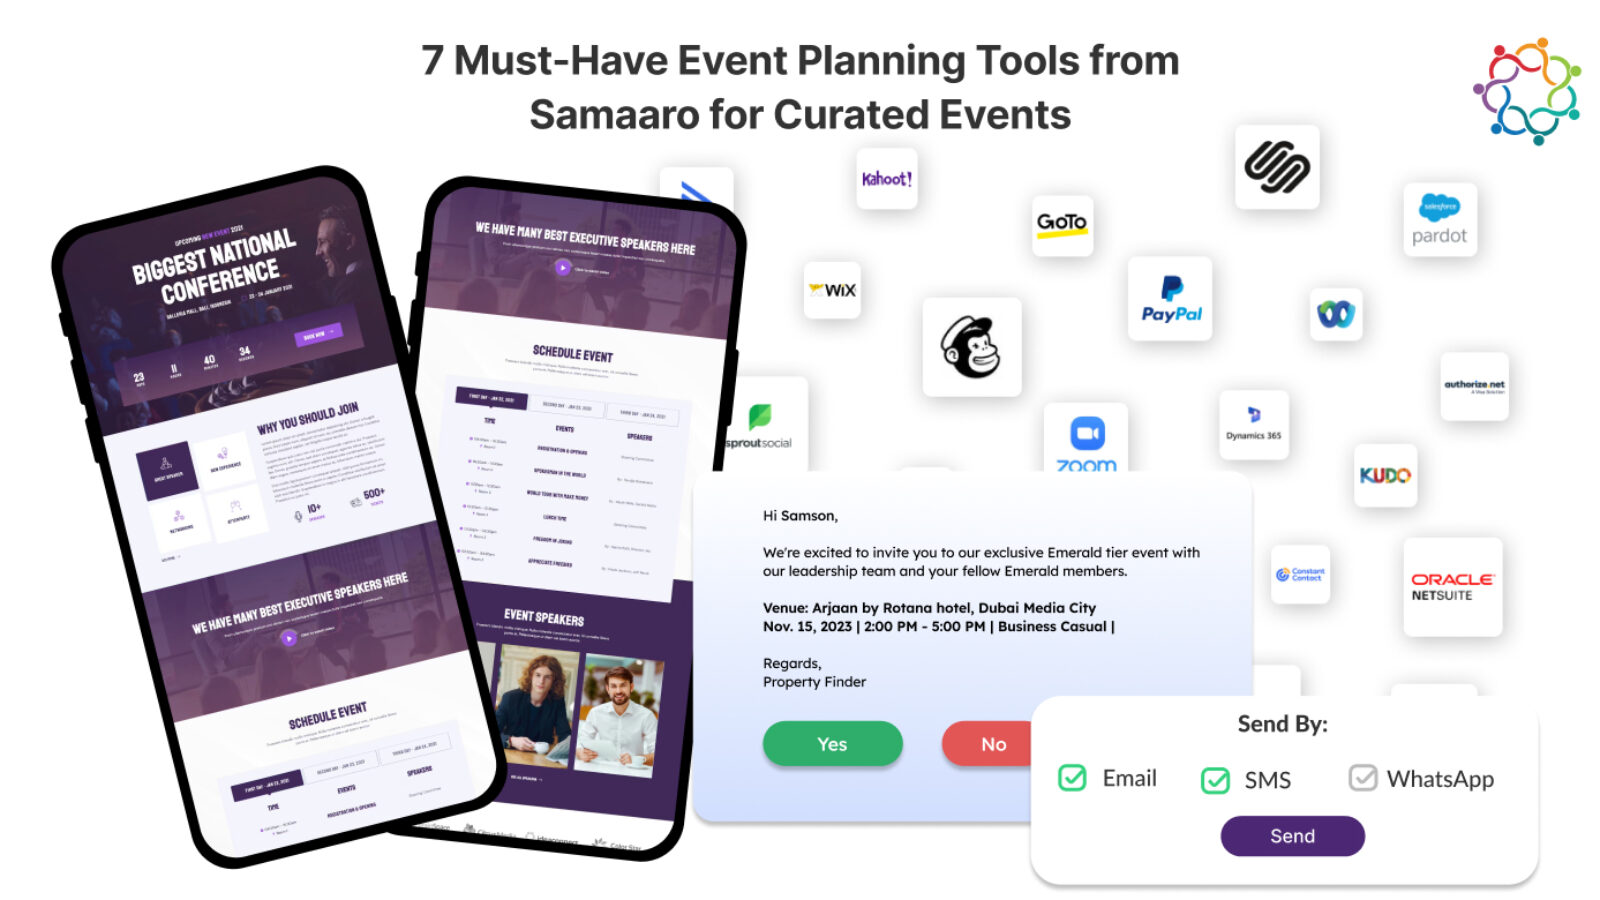 7 Must-Have Event Planning Tools from Samaaro for Curated Events